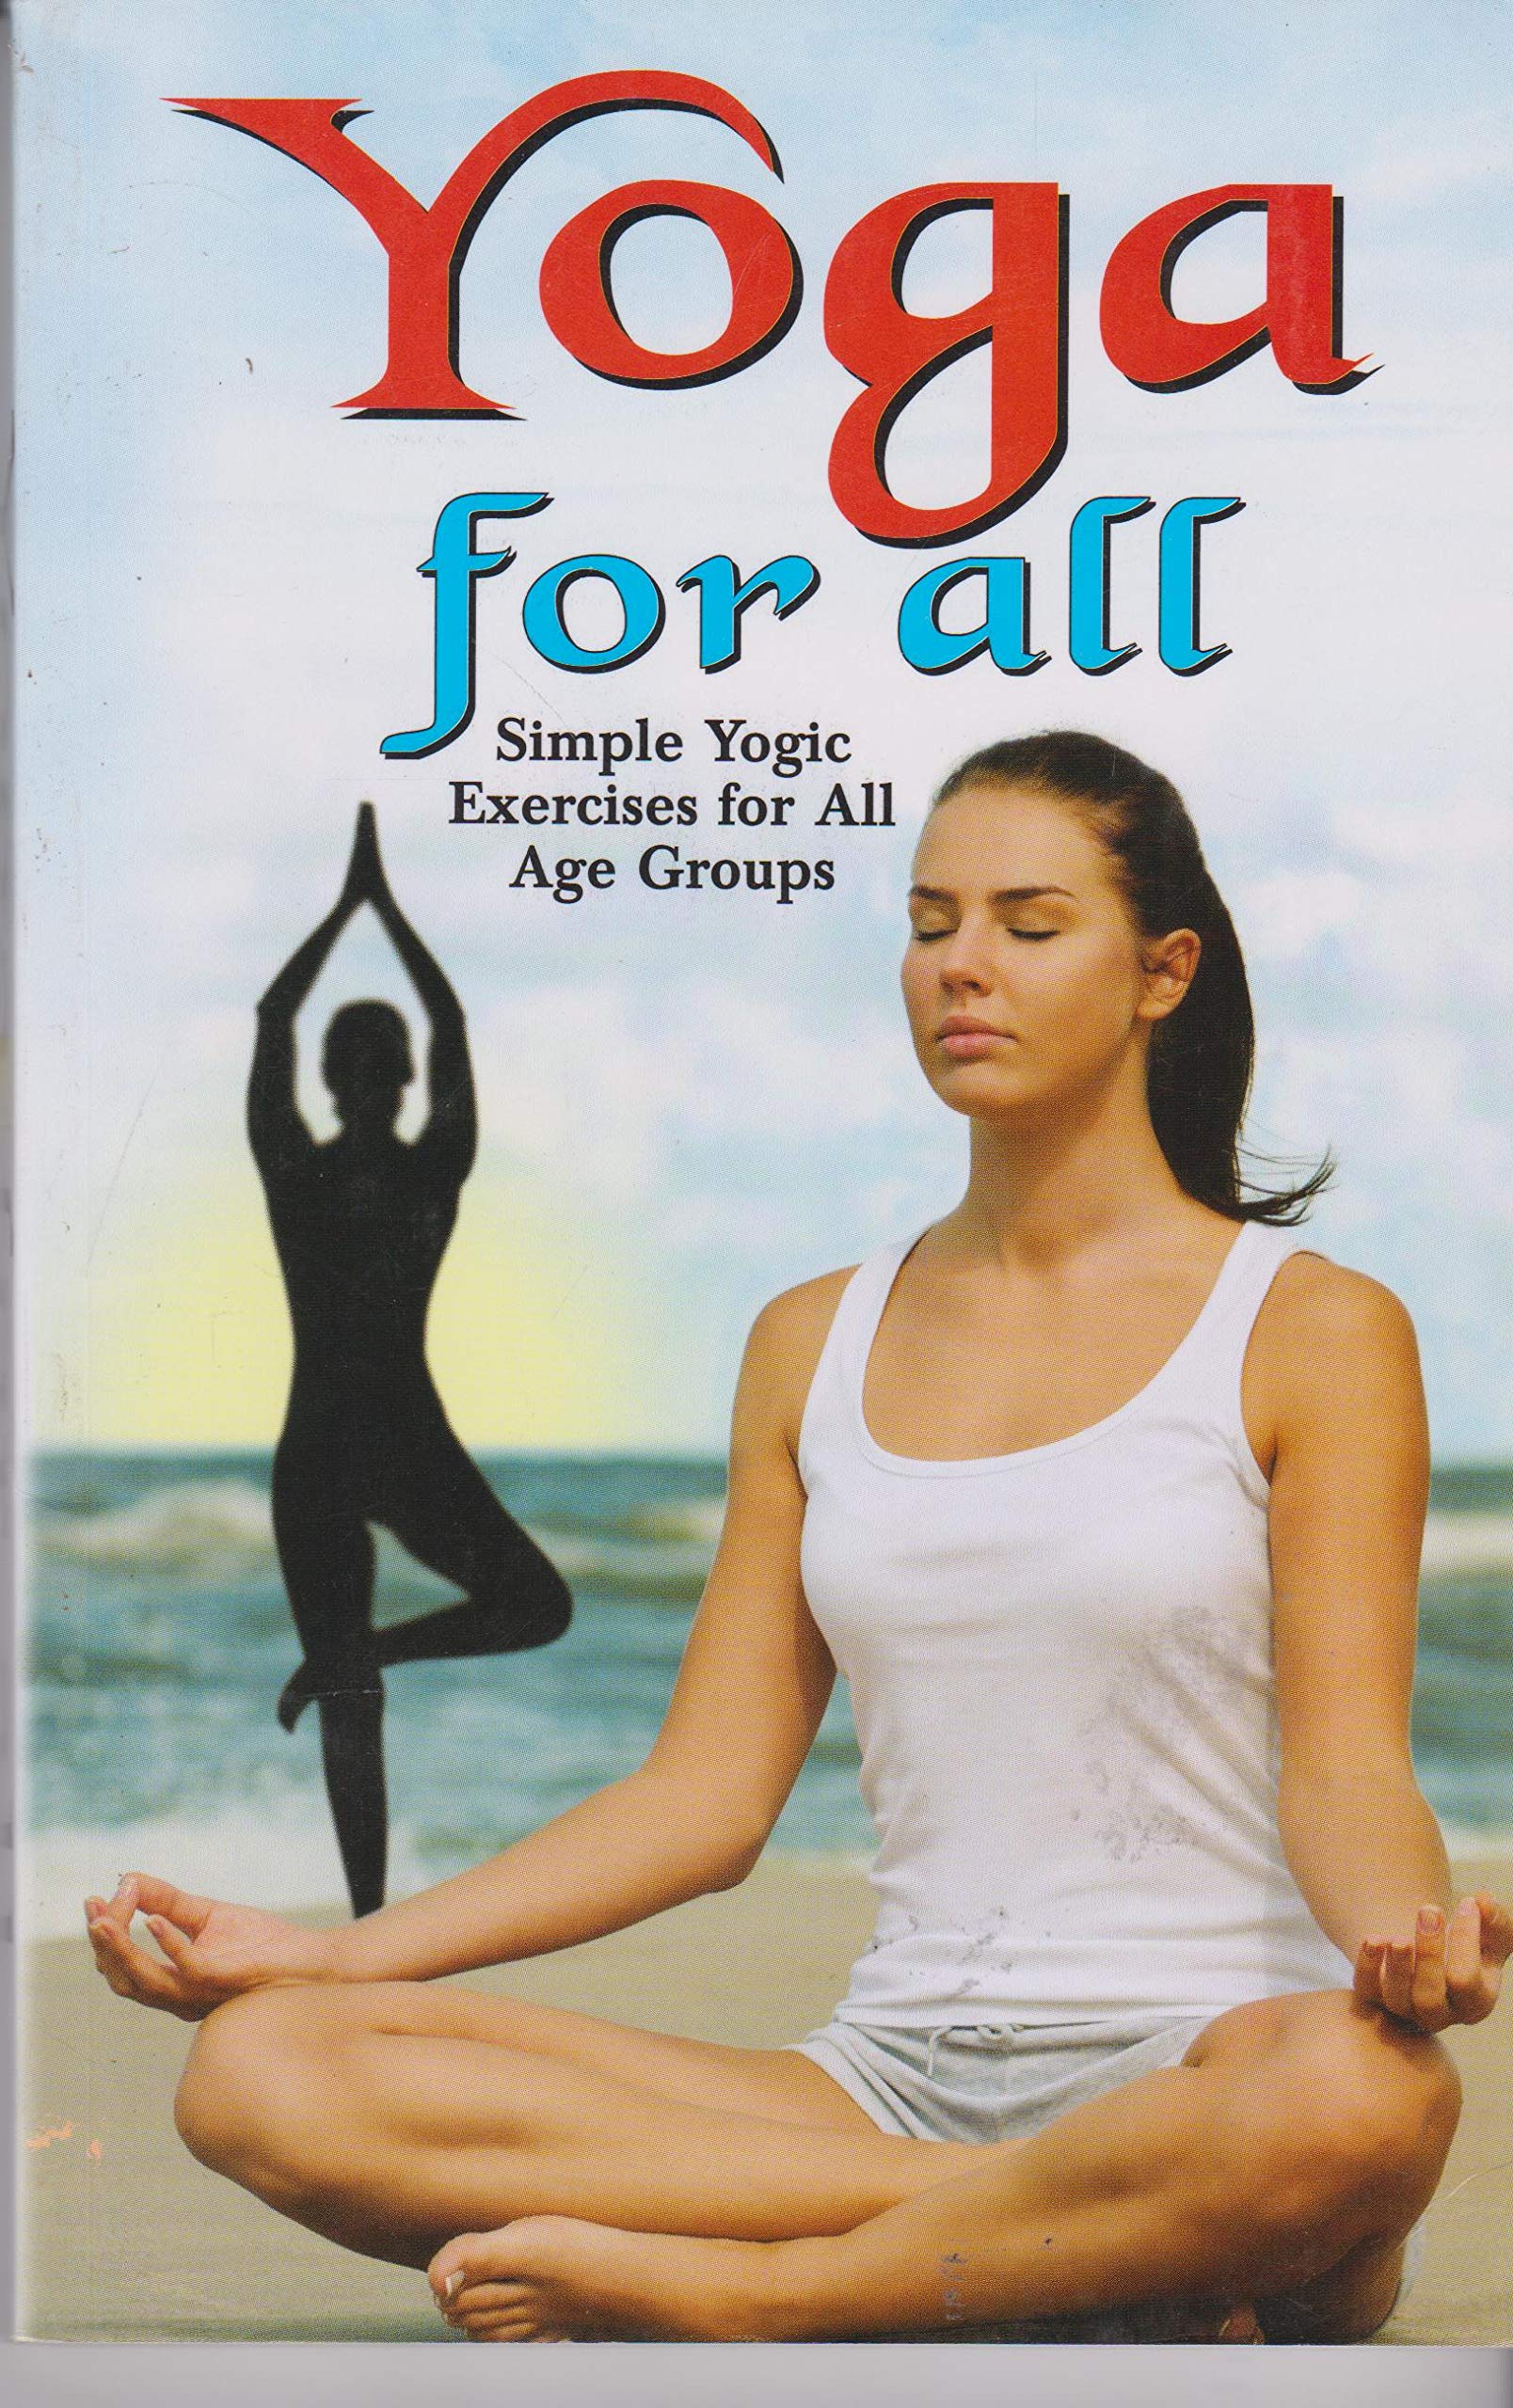 YOGA FOR ALL